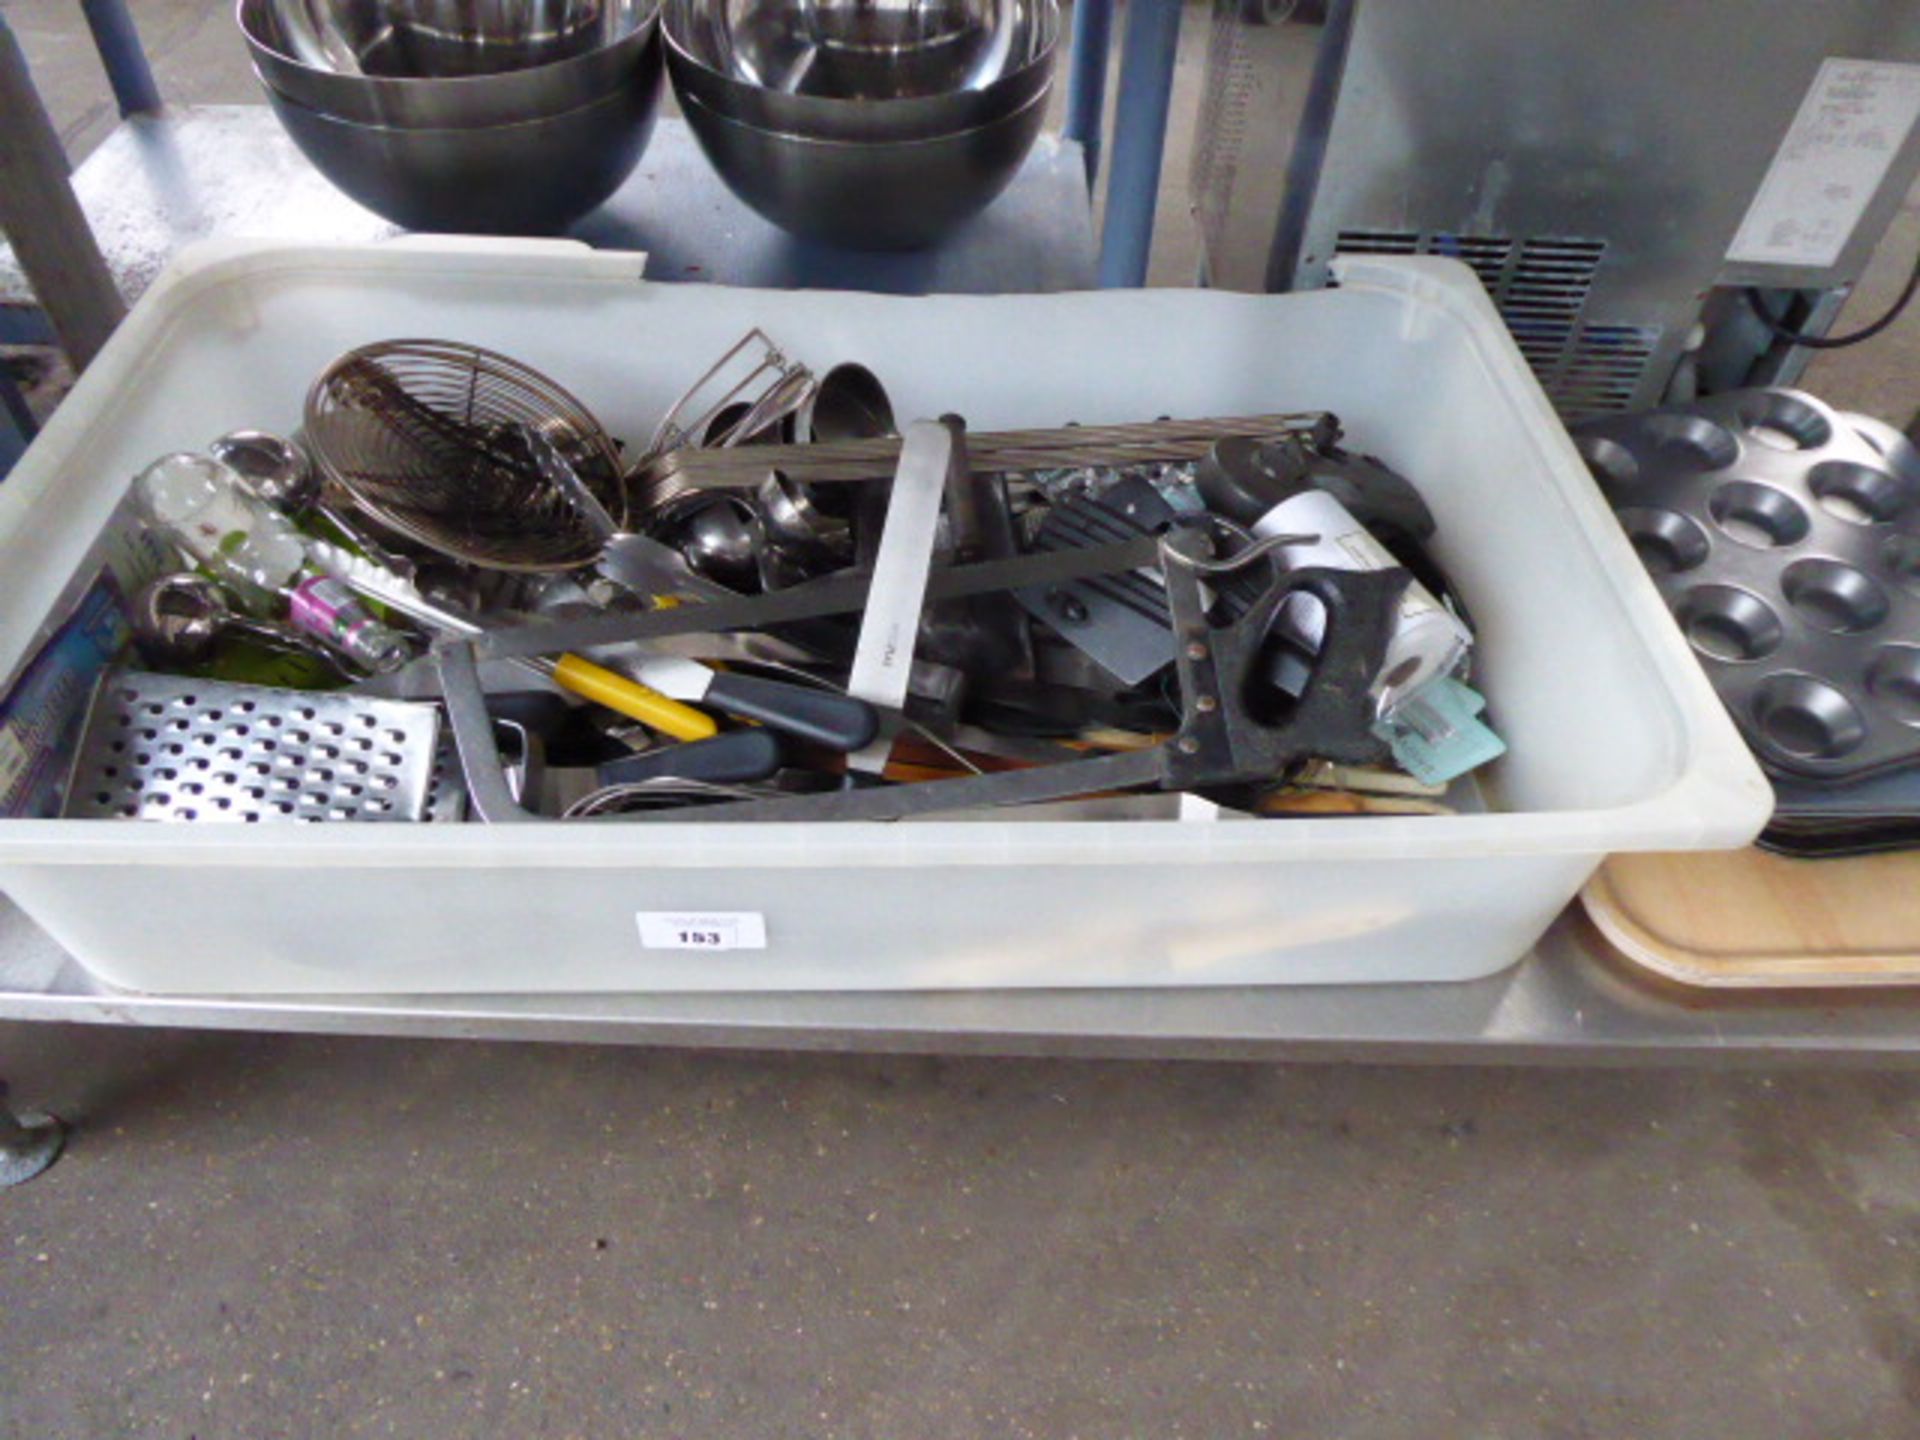 Large plastic tray containing various chef's utensils and butchery utensils